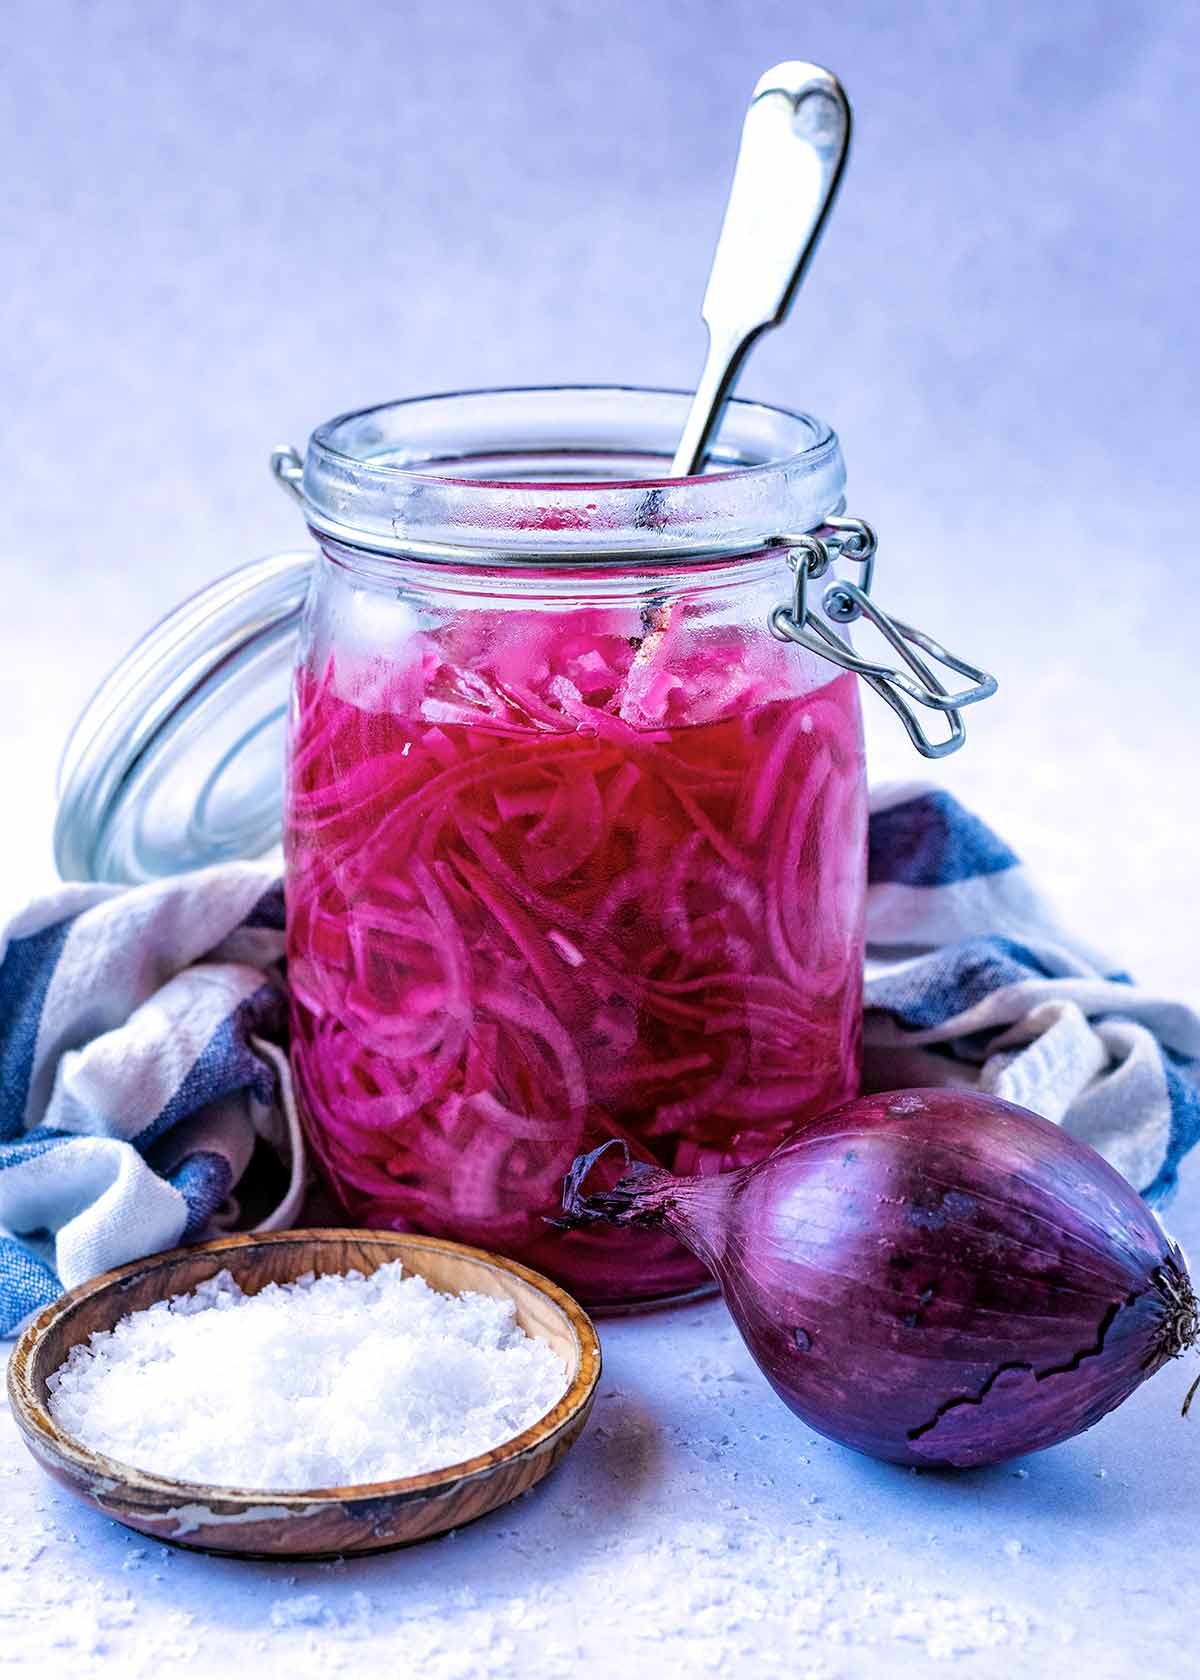 A jar of sliced pickled onions next to an onion and a small dish of salt.